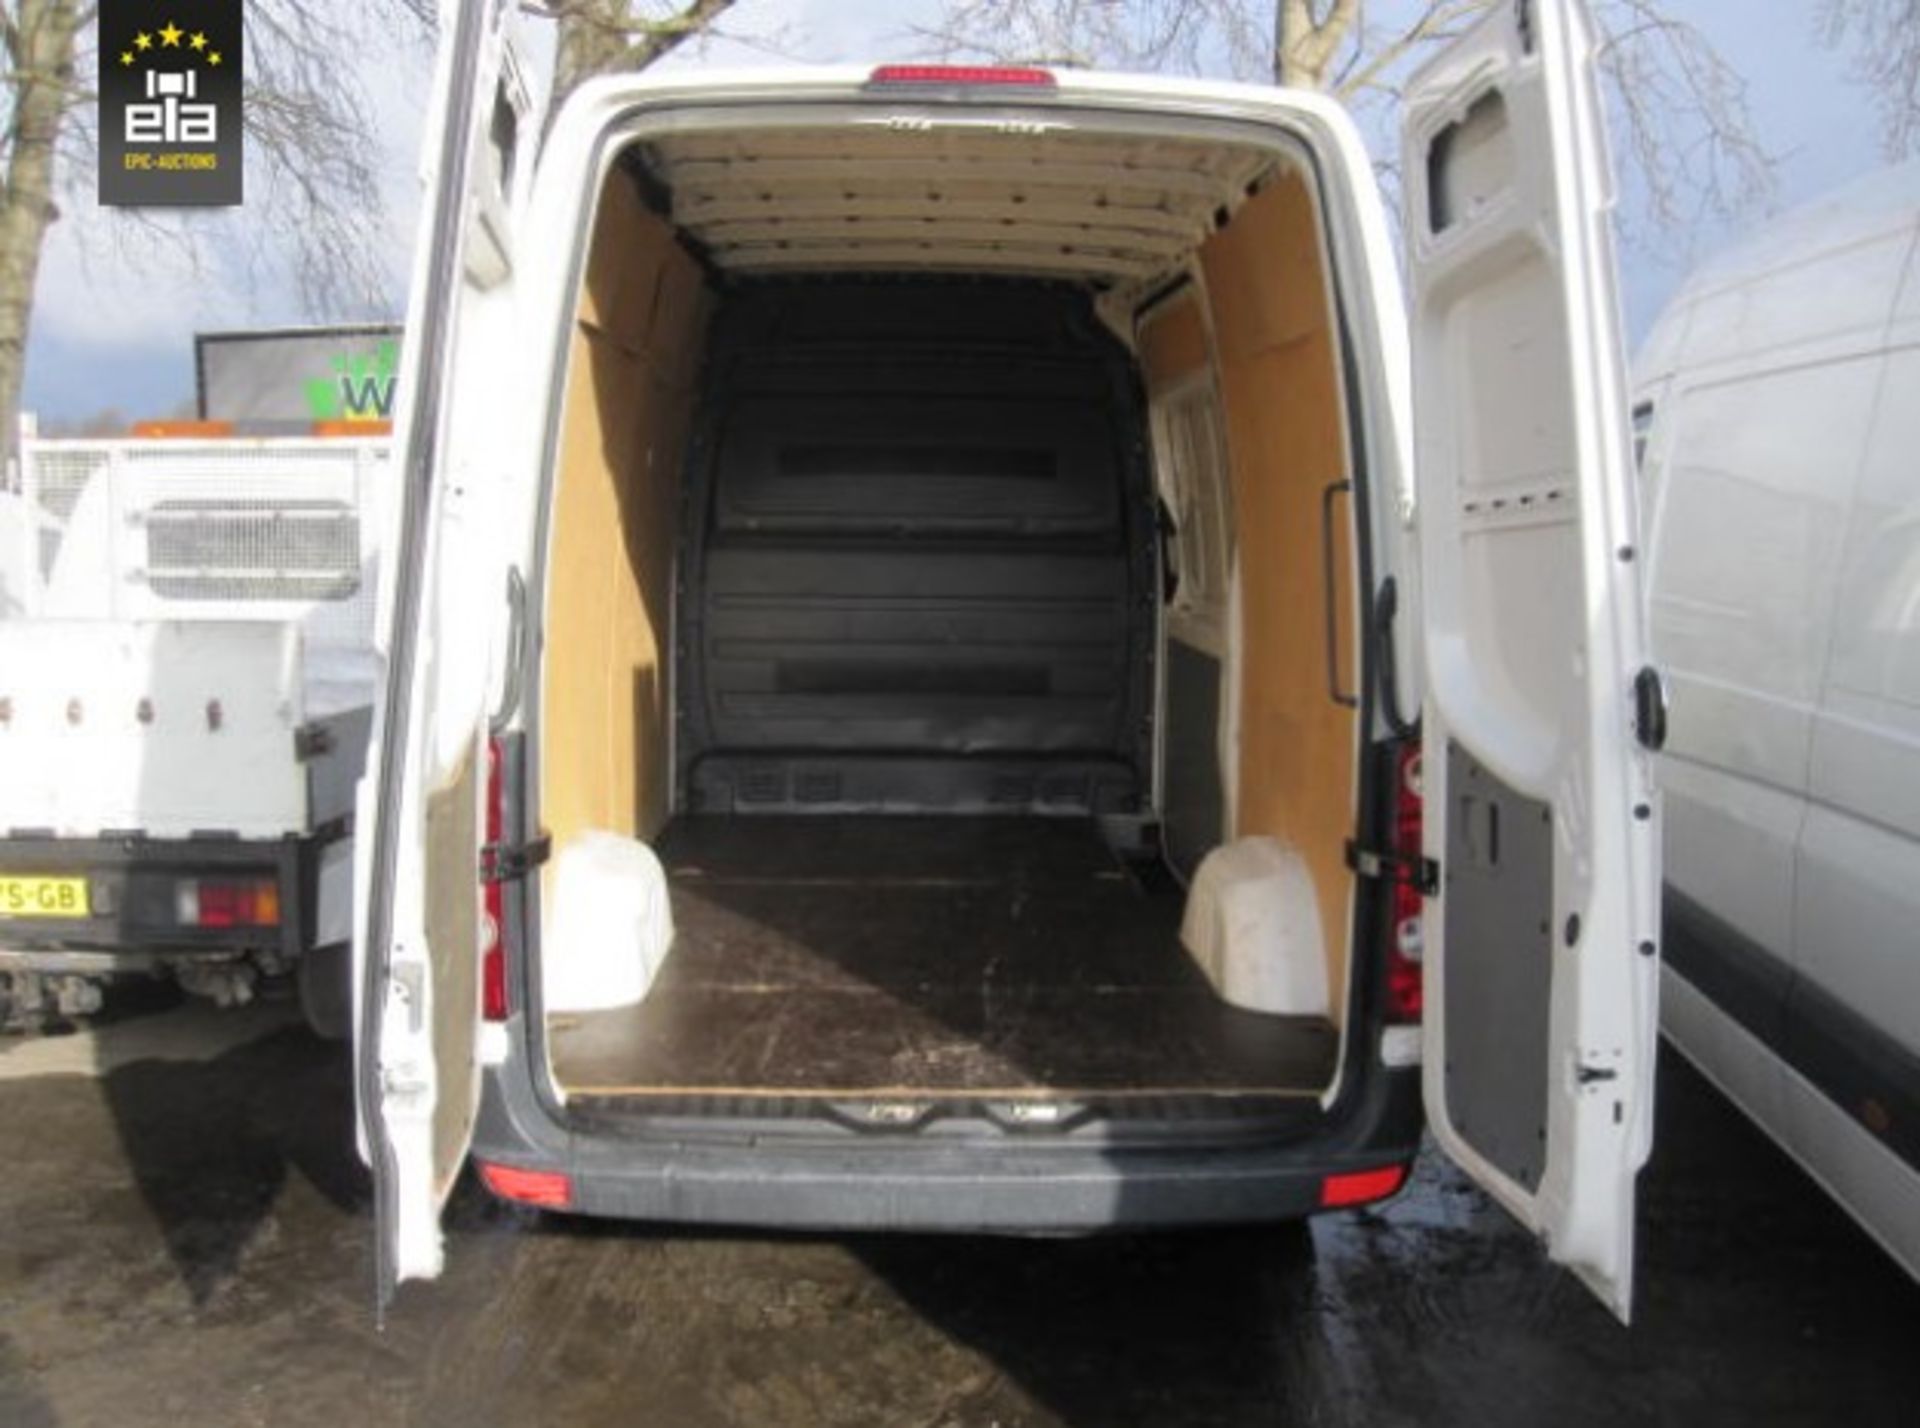 2011 Volkswagen Crafter 2.5 TDI L2H2 20151051 - Image 23 of 26